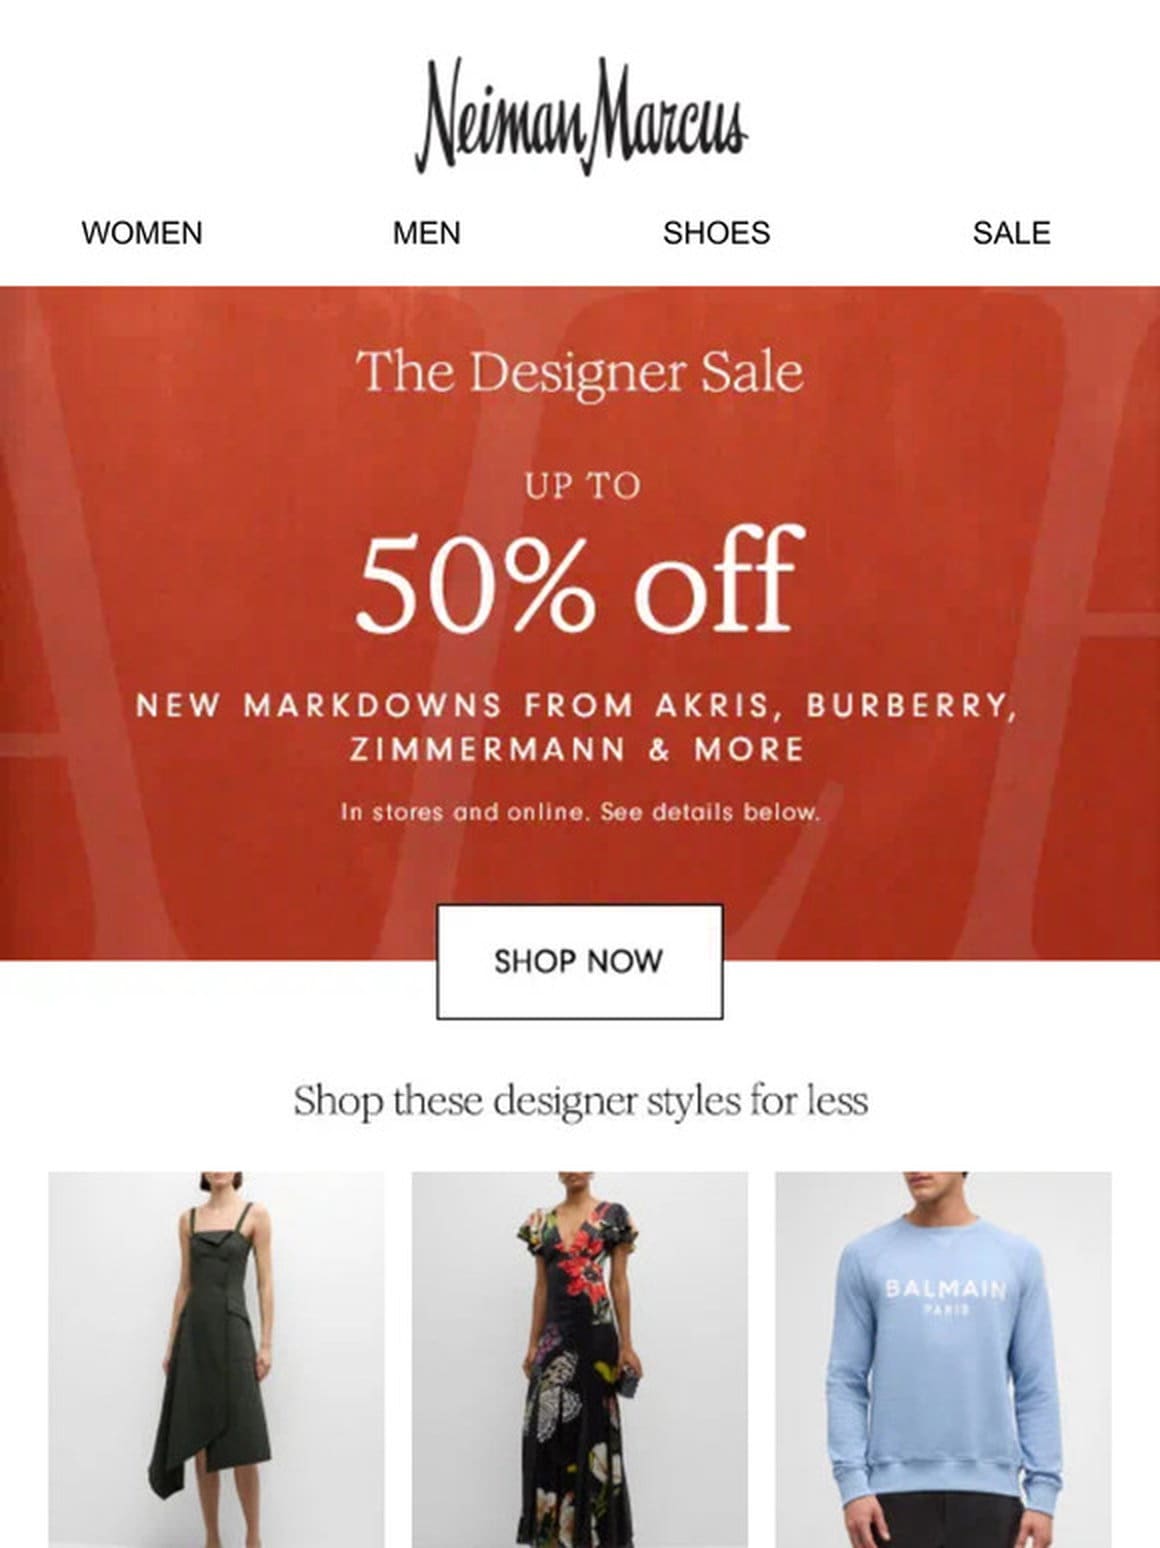 The Designer Sale: These styles are going fast